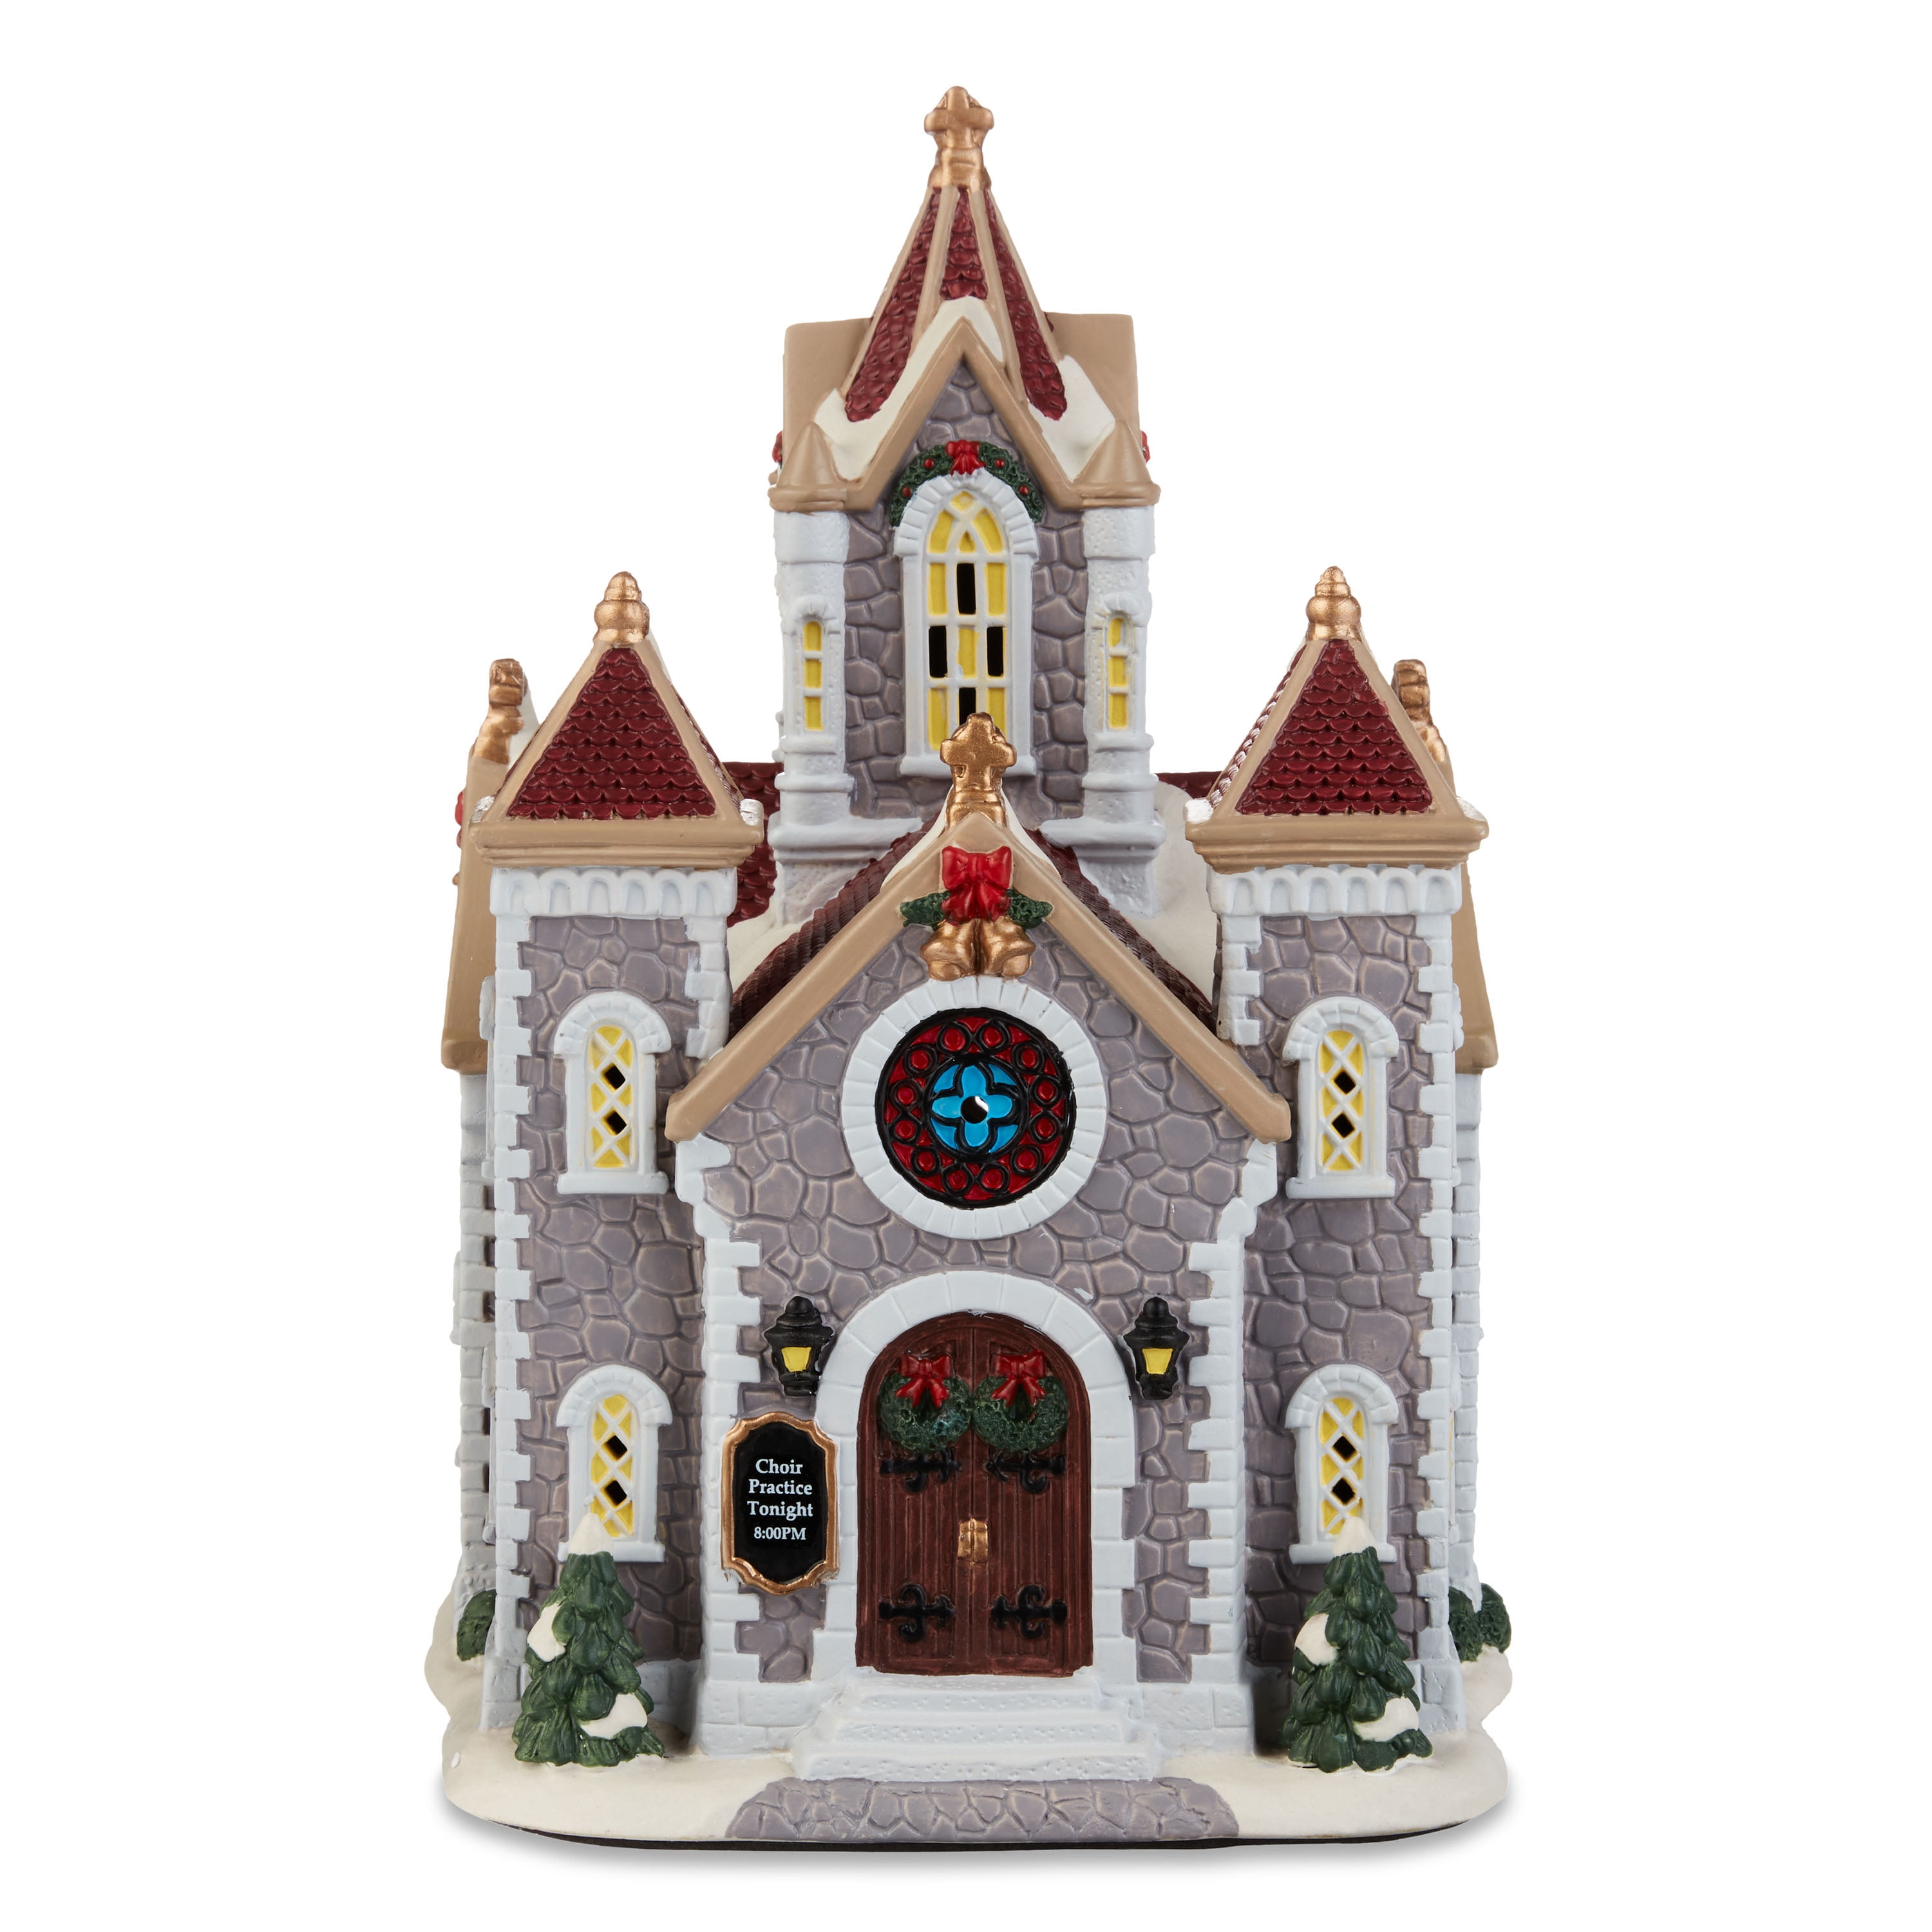 Holiday Time Indoor Decoration Multi-Color Village Cathedral, 7.25" X 8.5" X 10.625"H